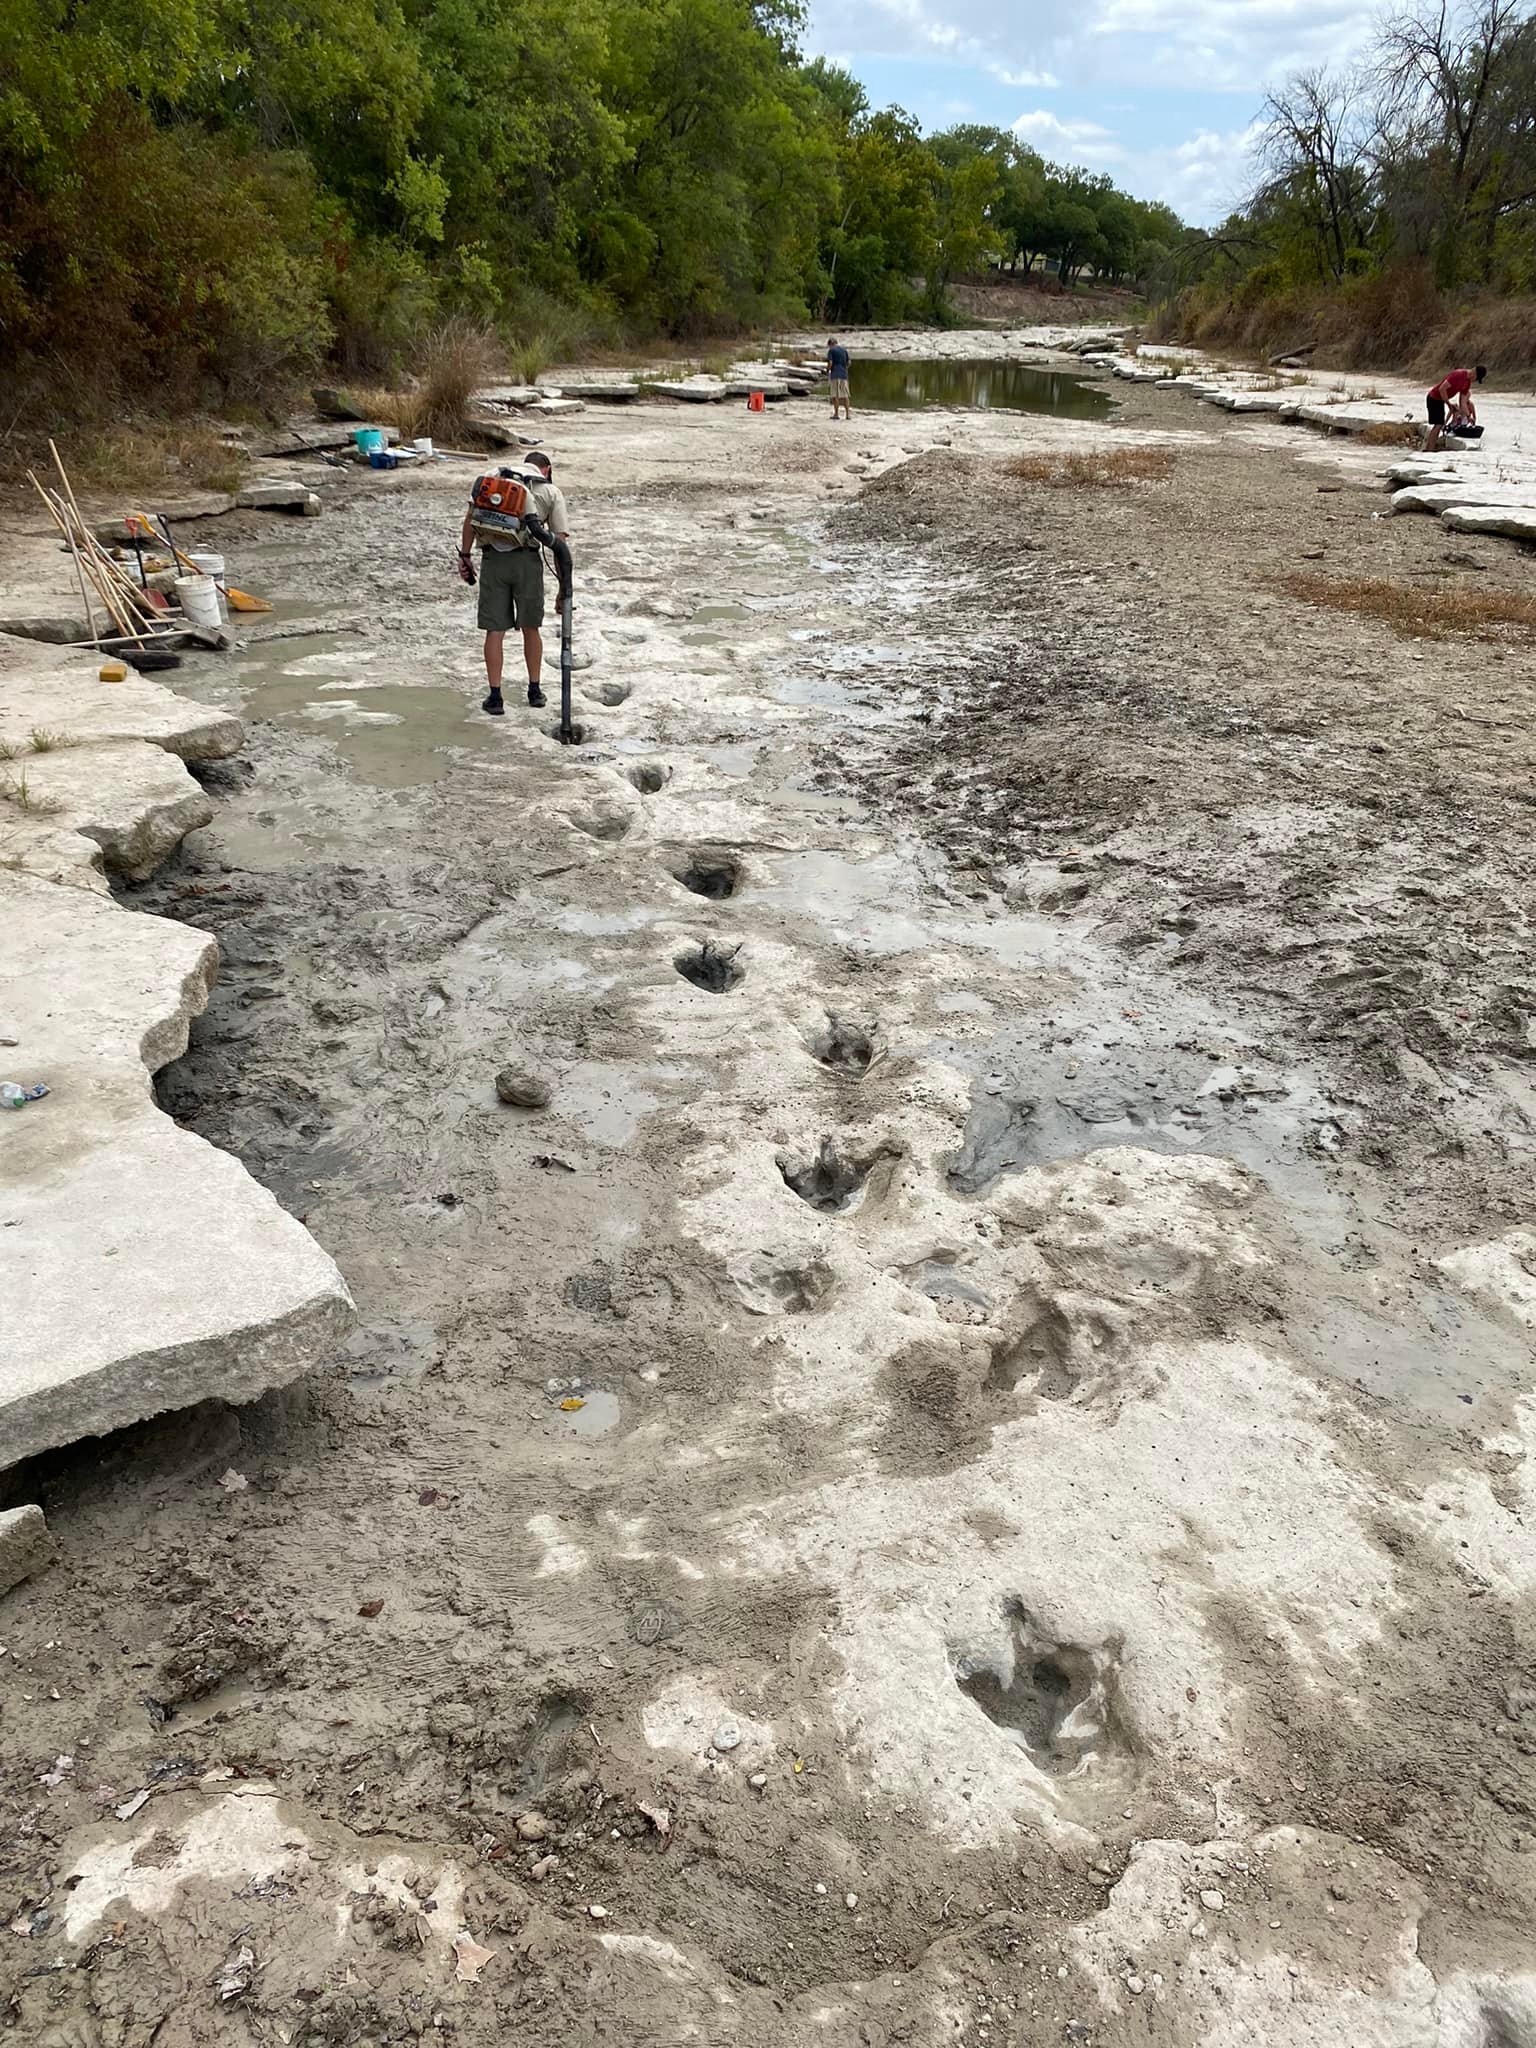 Dinosaur tracks from are revealed in a dried-out riverbed